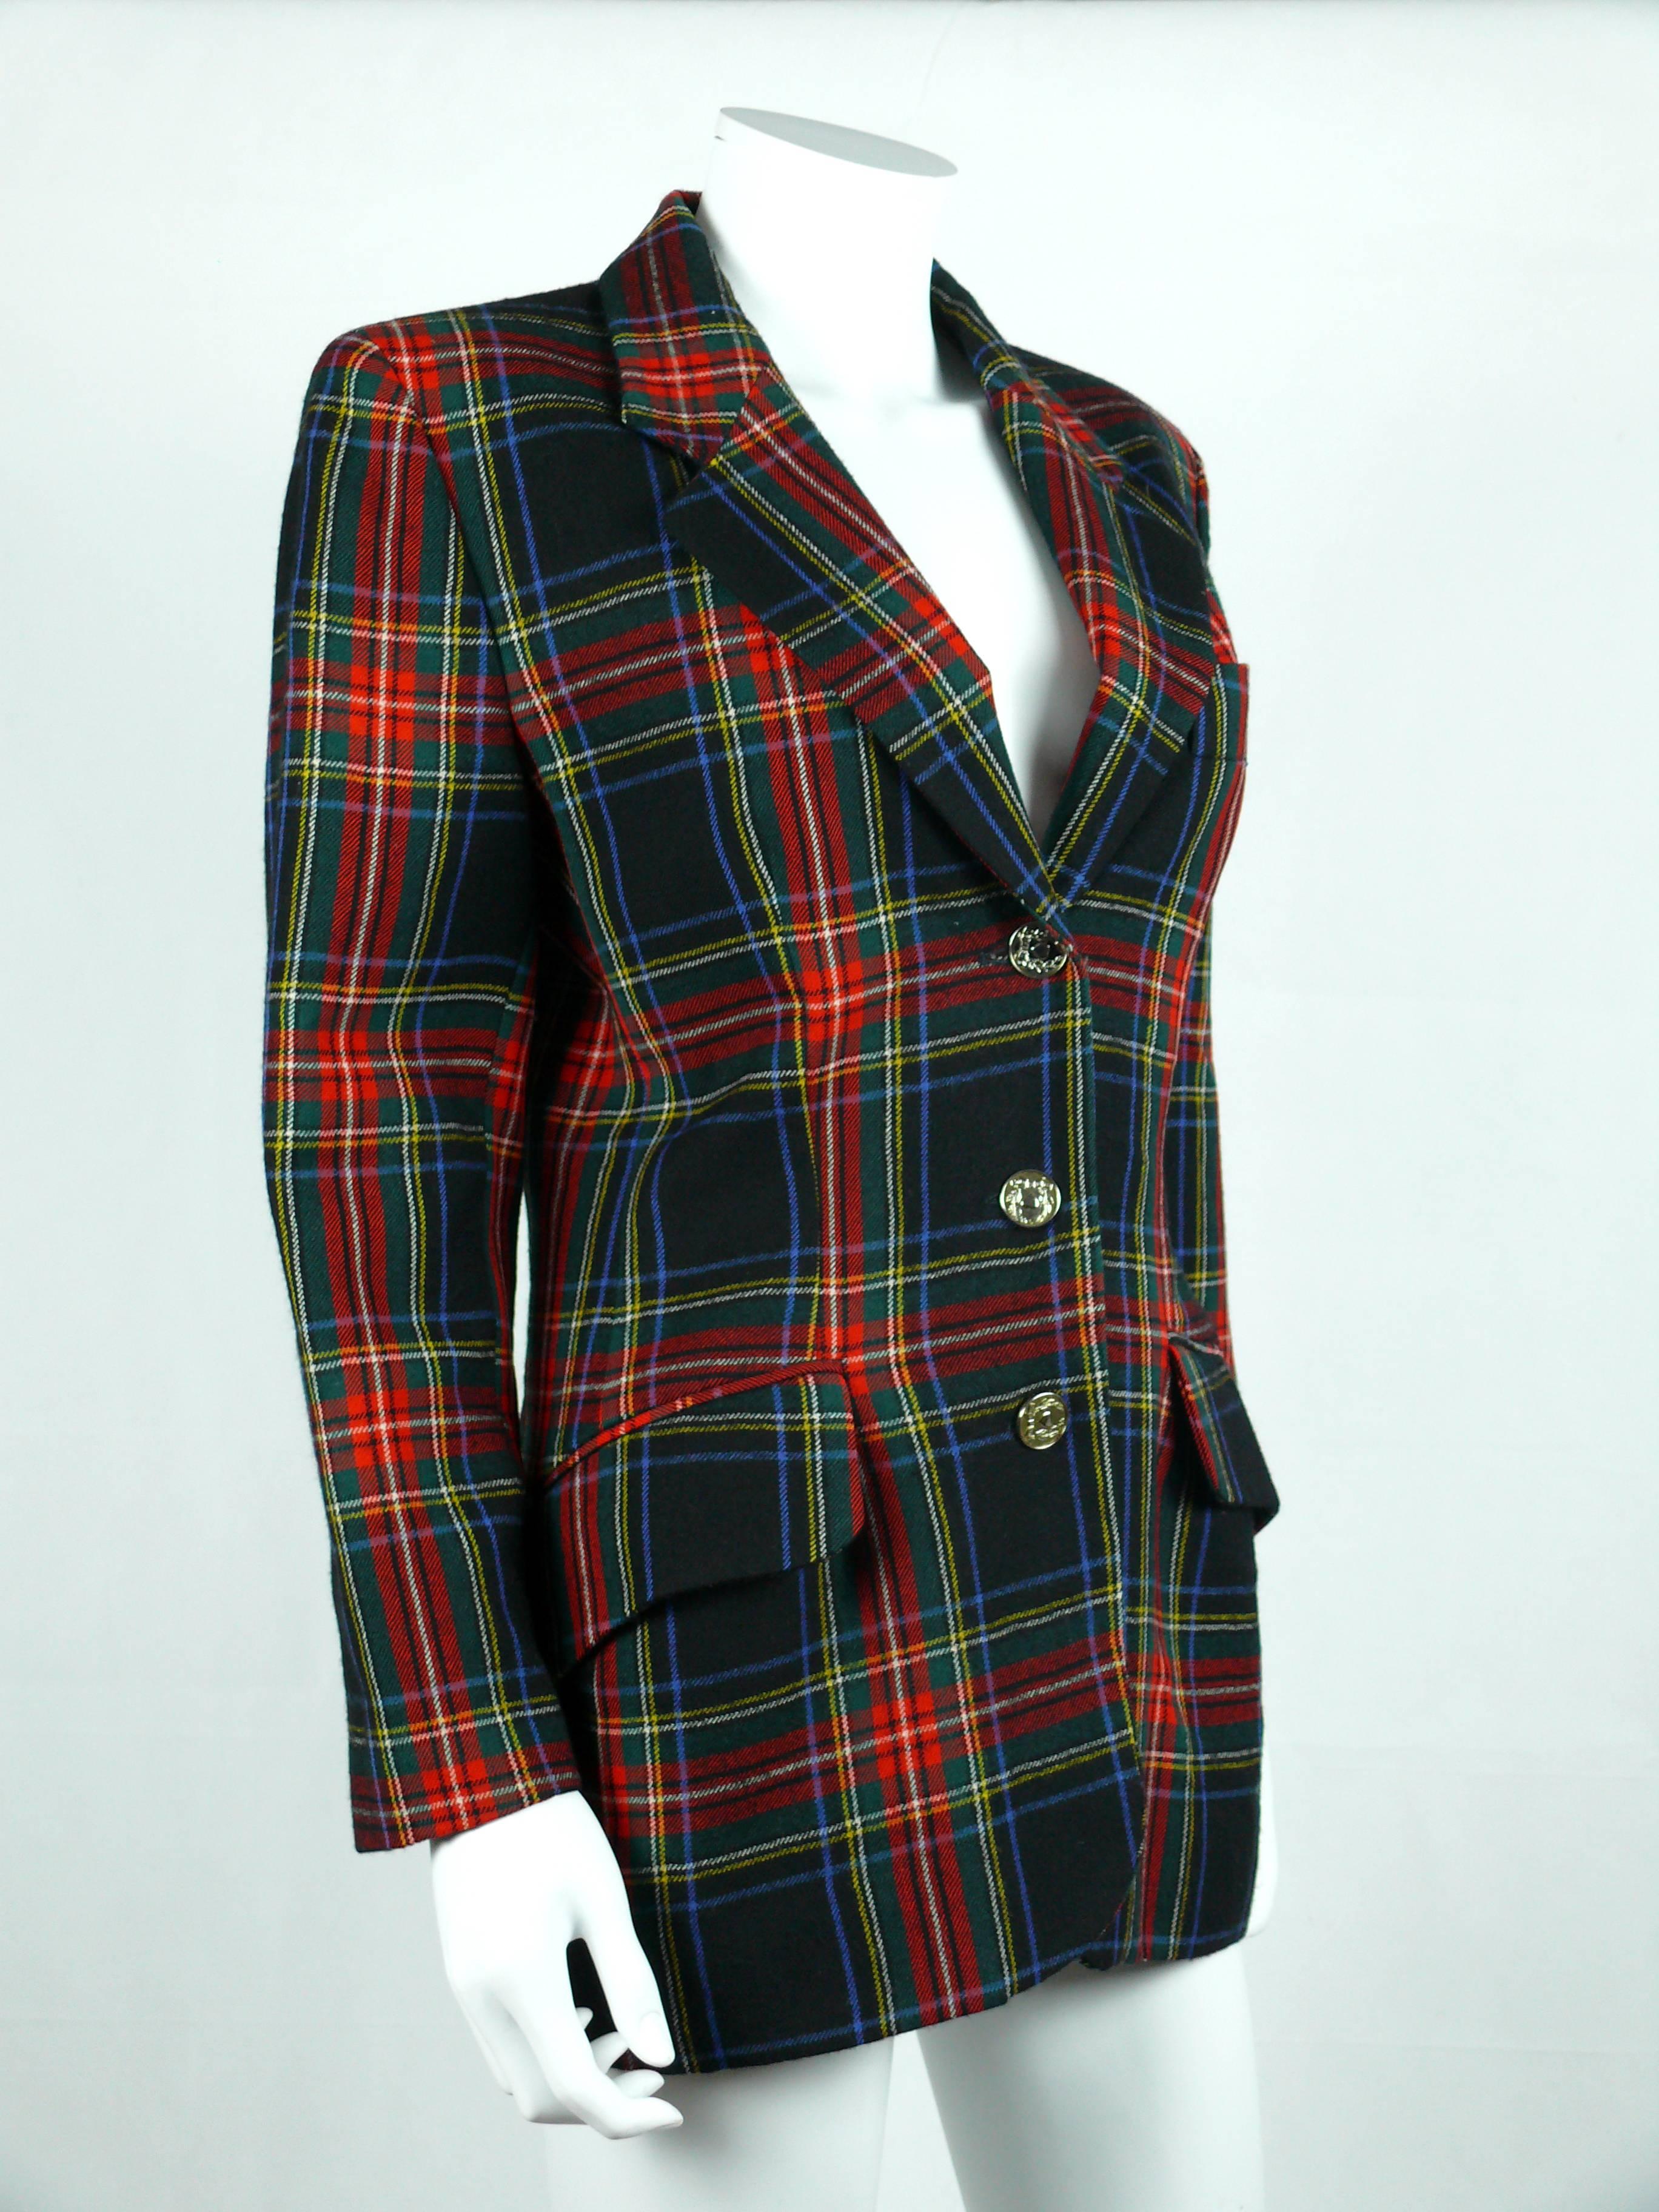 MOSCHINO vintage iconic wool tartan plaid blazer from the 1990s.

Two front pockets.
Button closure.
Fully lined.
Gorgeous fitted cut.

Label reads CHEAP AND CHIC by MOSCHINO Made in Italy.

Color : red / green / blue / yellow /